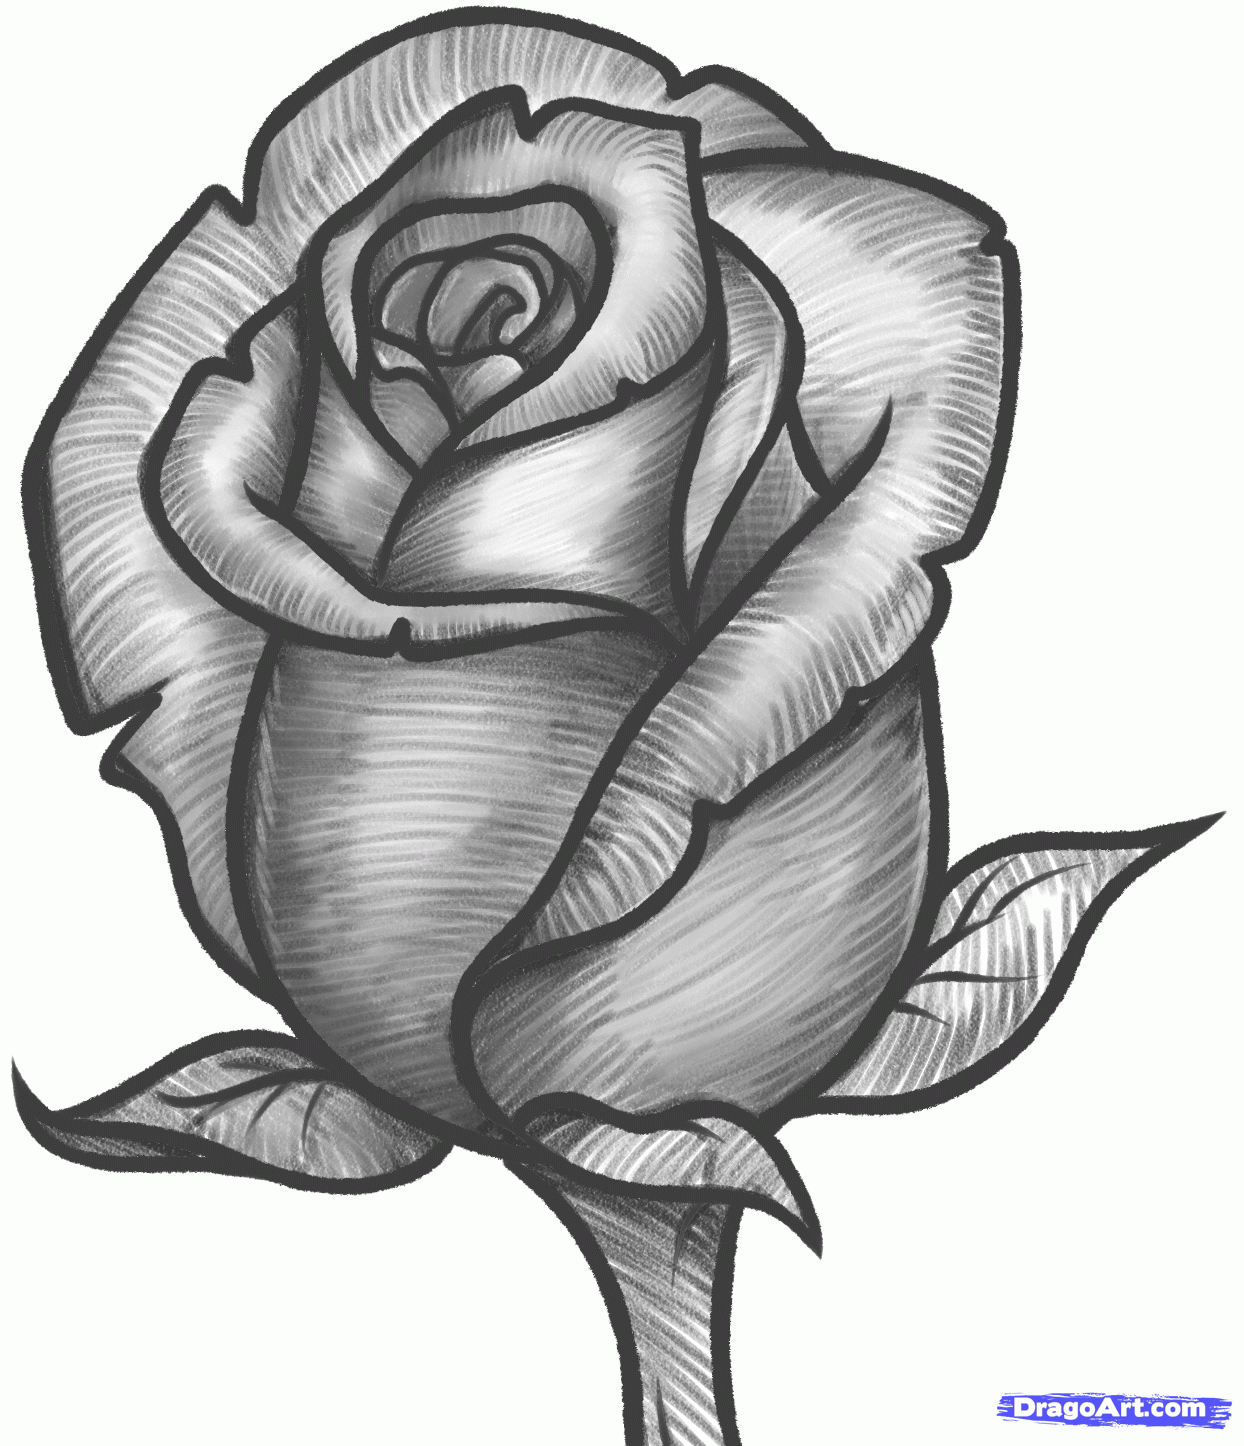 JUST SIMPLE BLOG: HOW TO DRAW A ROSE BUD